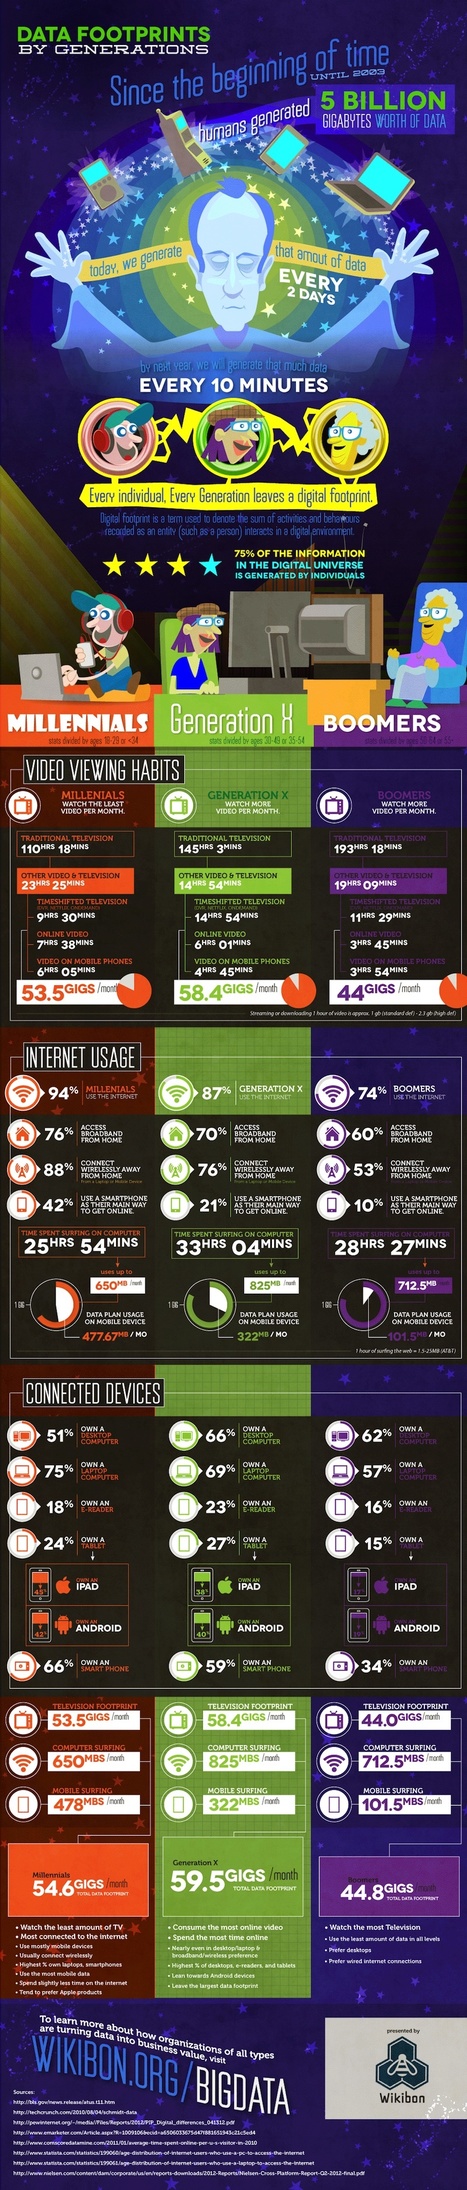 Data Footprints by Generations #Infographic | Business Improvement and Social media | Scoop.it